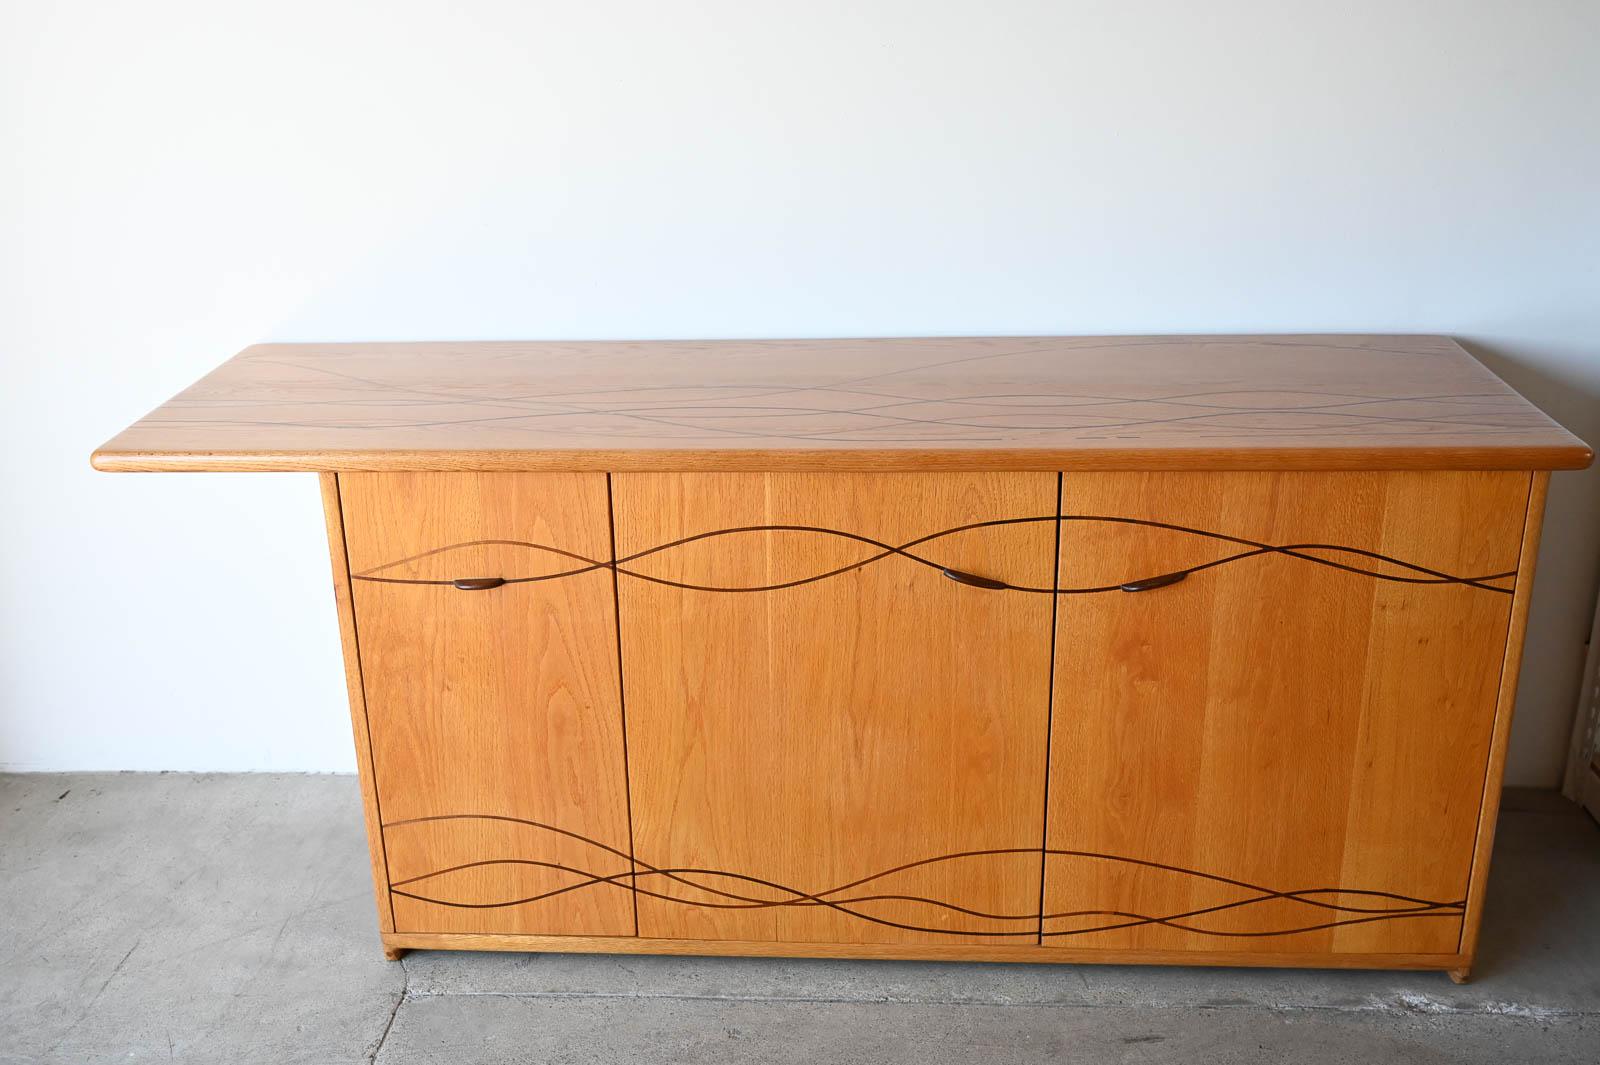 American Craftsman Bespoke Cabinet with Carved Inlay by Robert Squire Bierbaum, 1995 For Sale